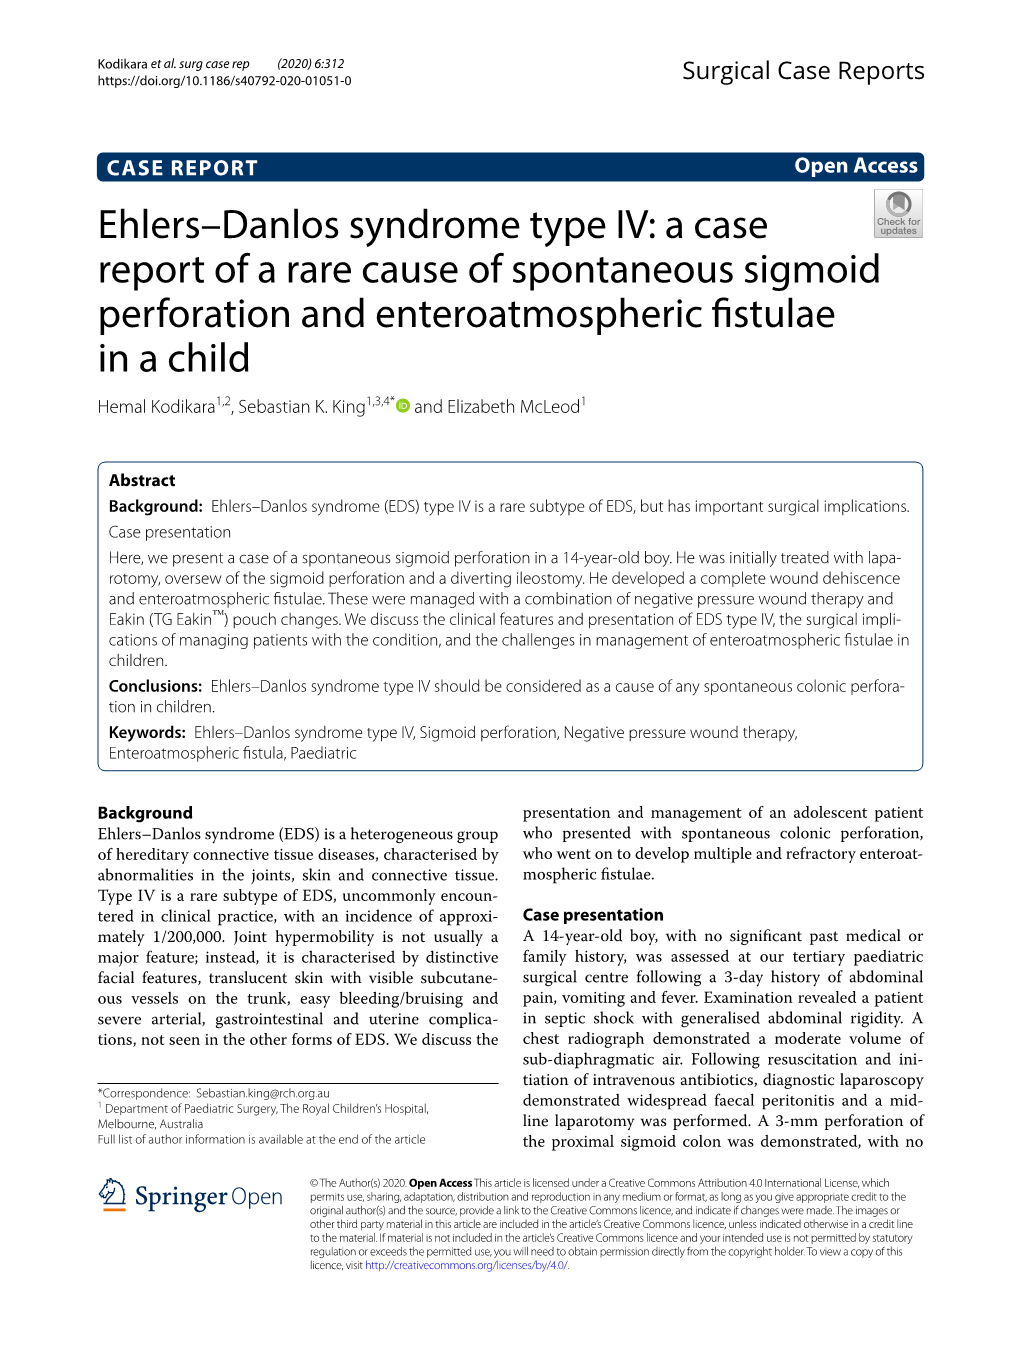 Ehlers–Danlos Syndrome Type IV: a Case Report of a Rare Cause of Spontaneous Sigmoid Perforation and Enteroatmospheric Fistula